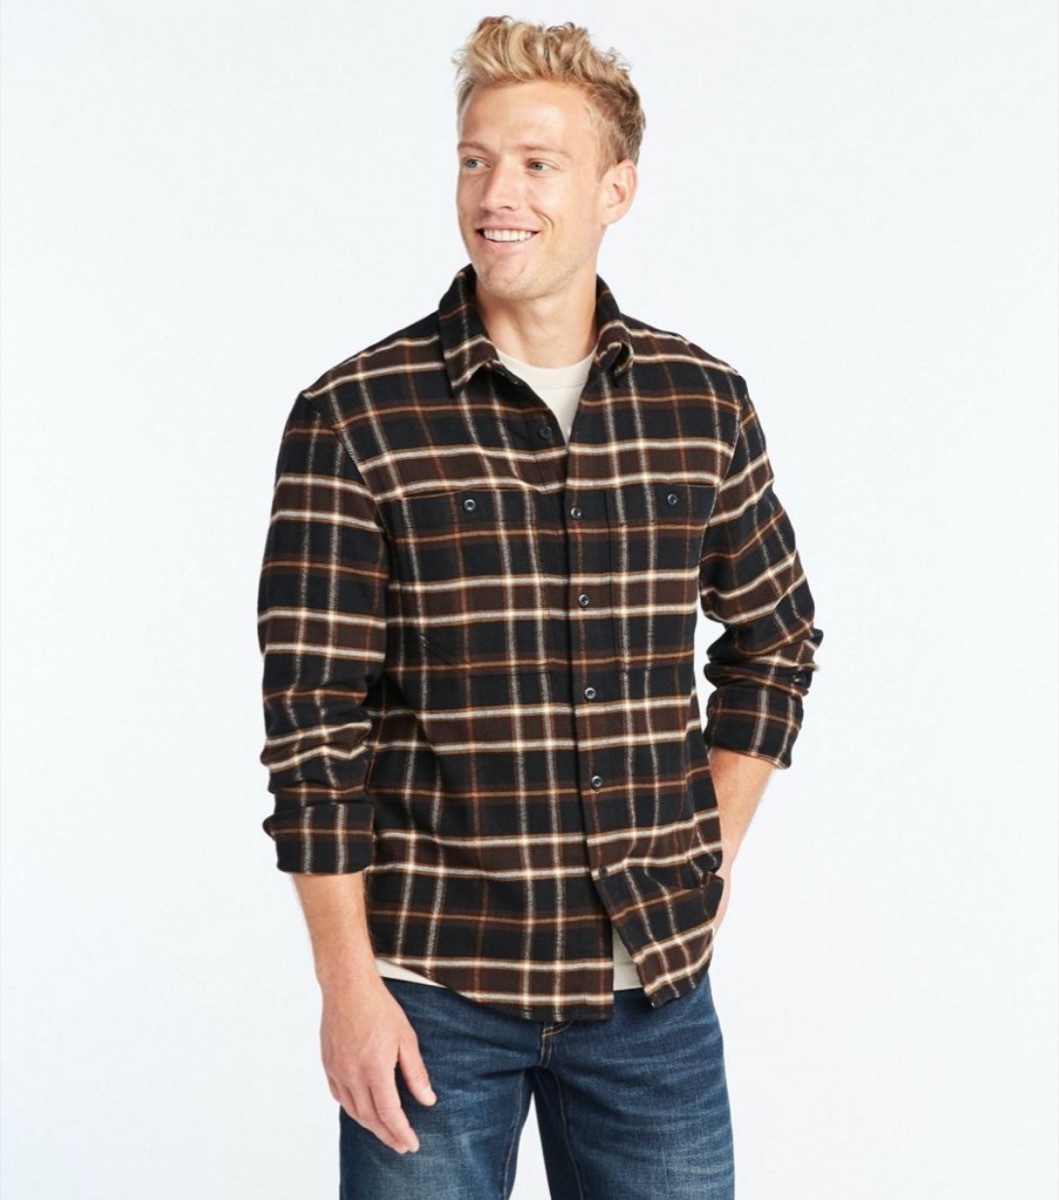 young man in brown and black plaid shirt and jeans